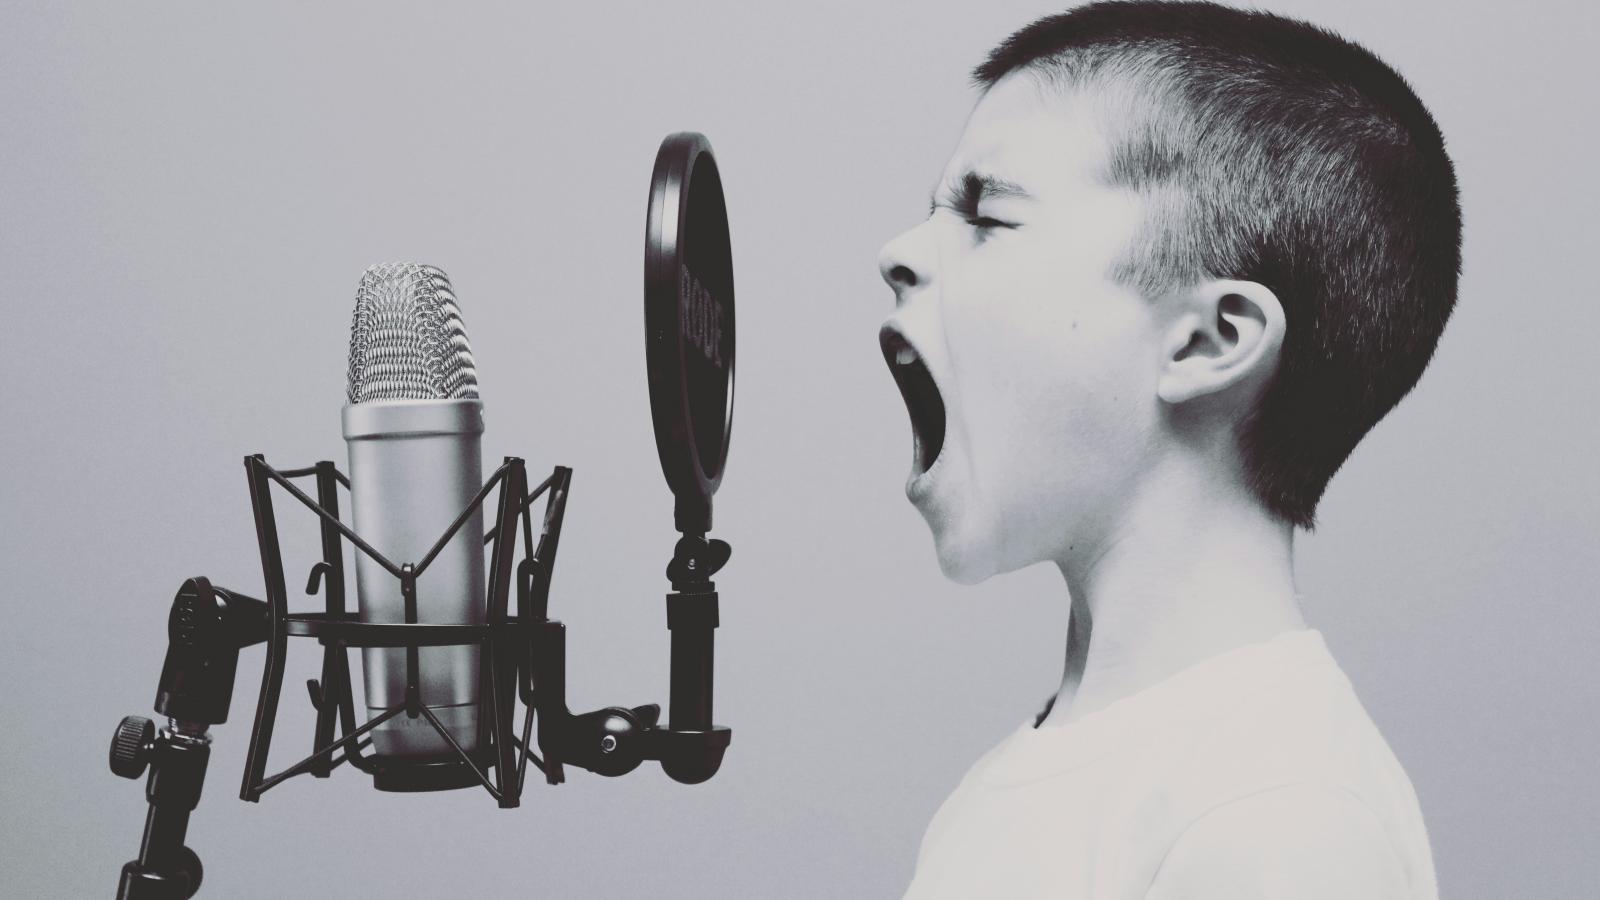 black & white image, young boy shouting into micropone